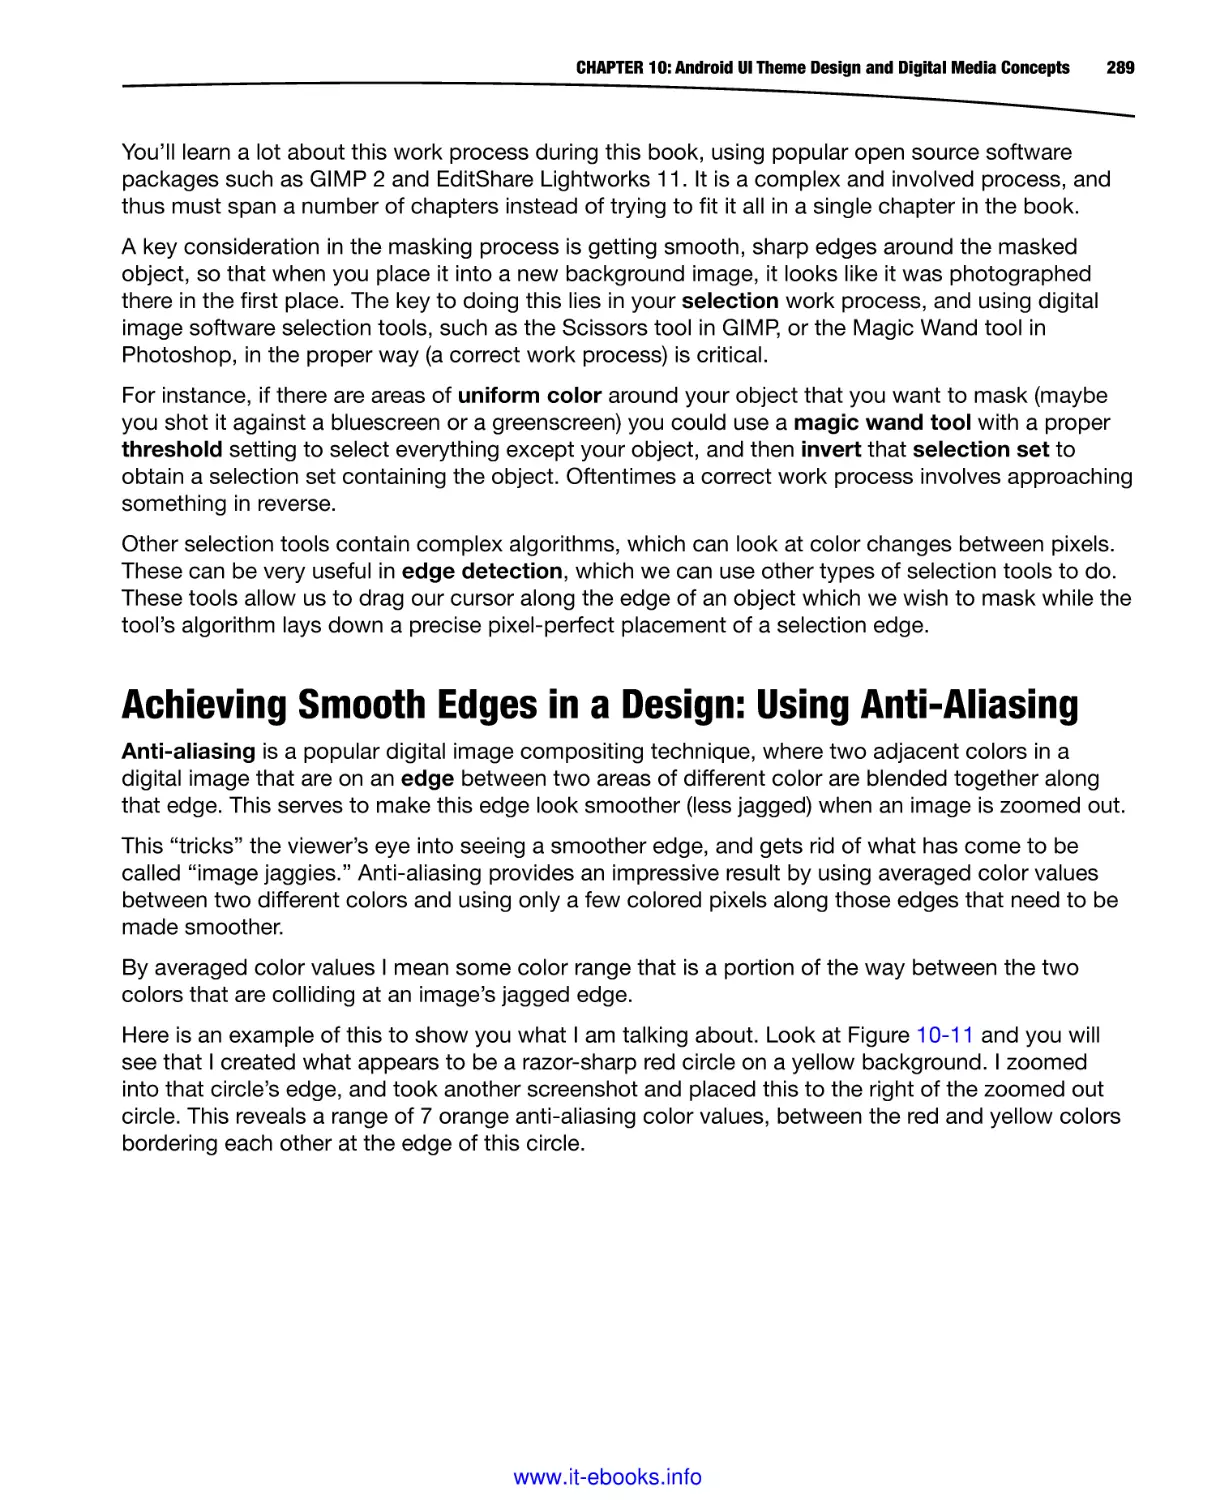 Achieving Smooth Edges in a Design